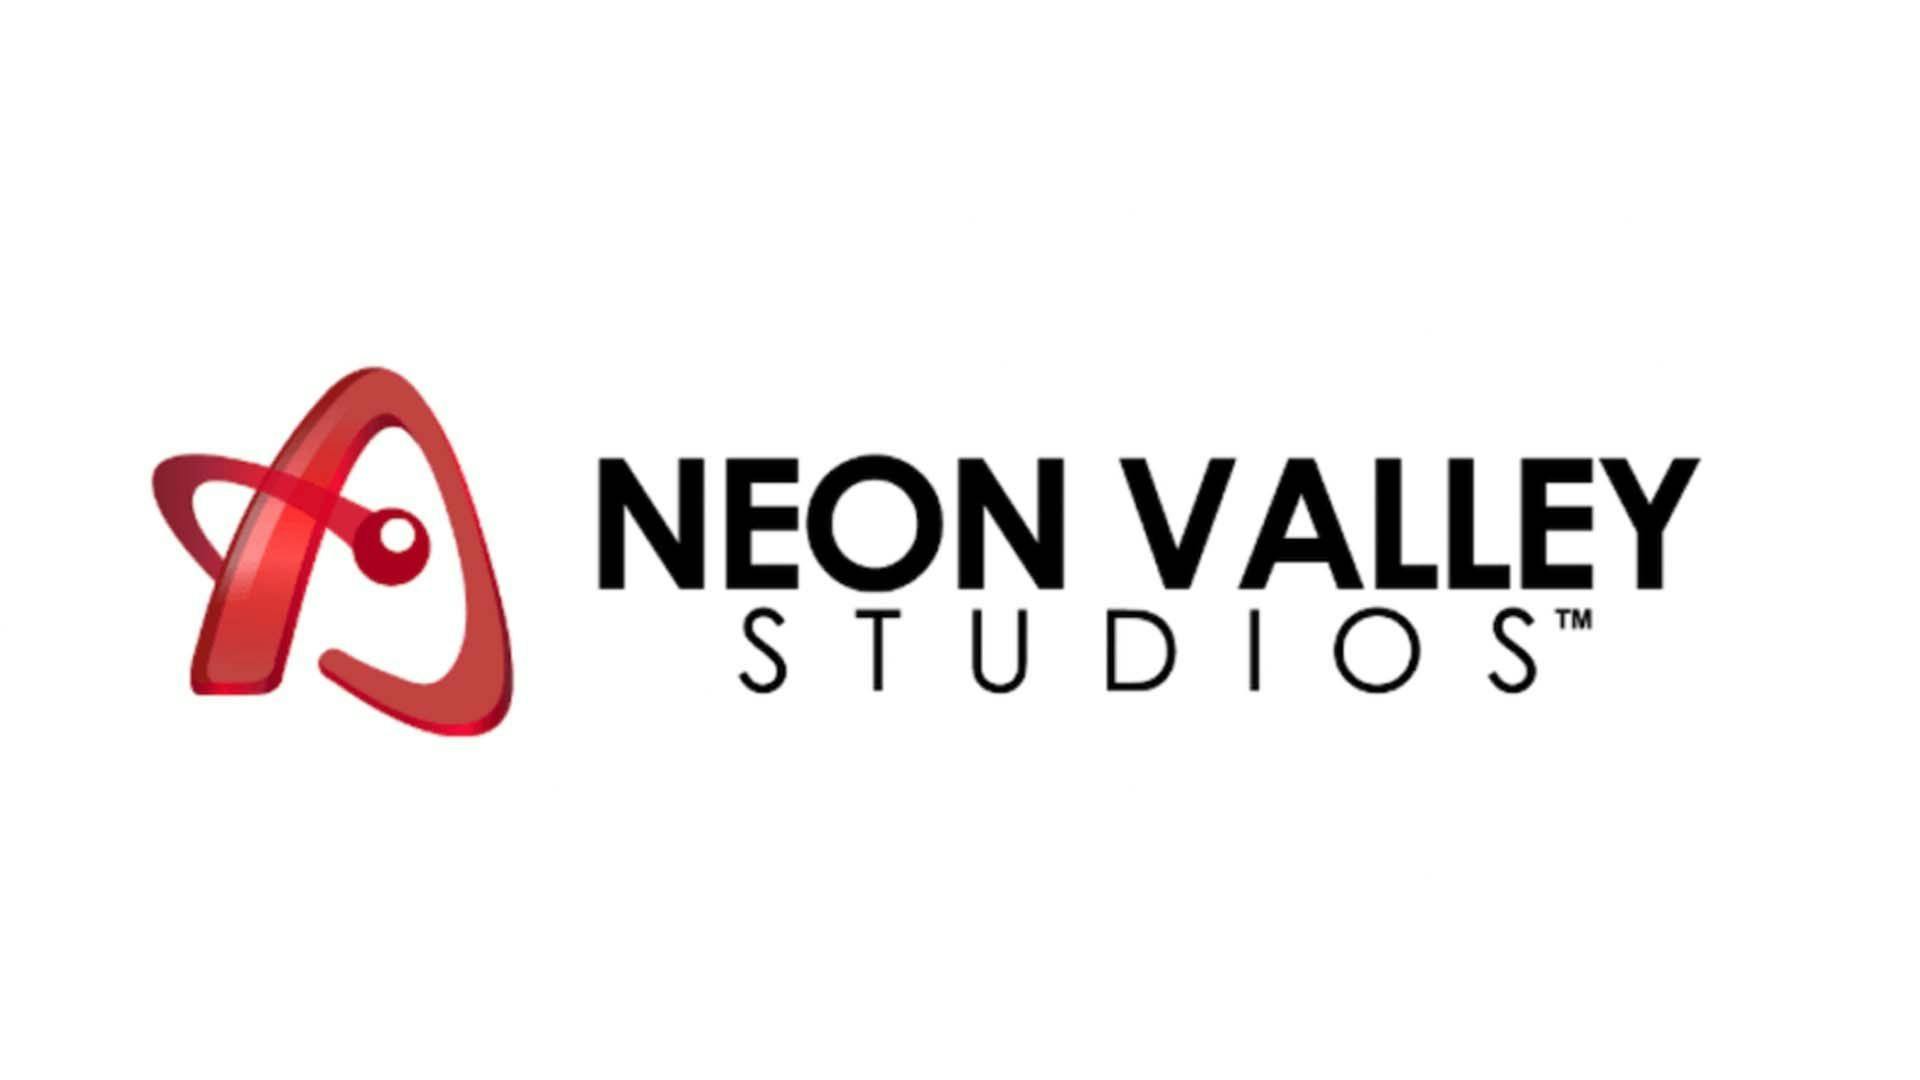 Neon Valley Studios Producer Free Slot Online Games